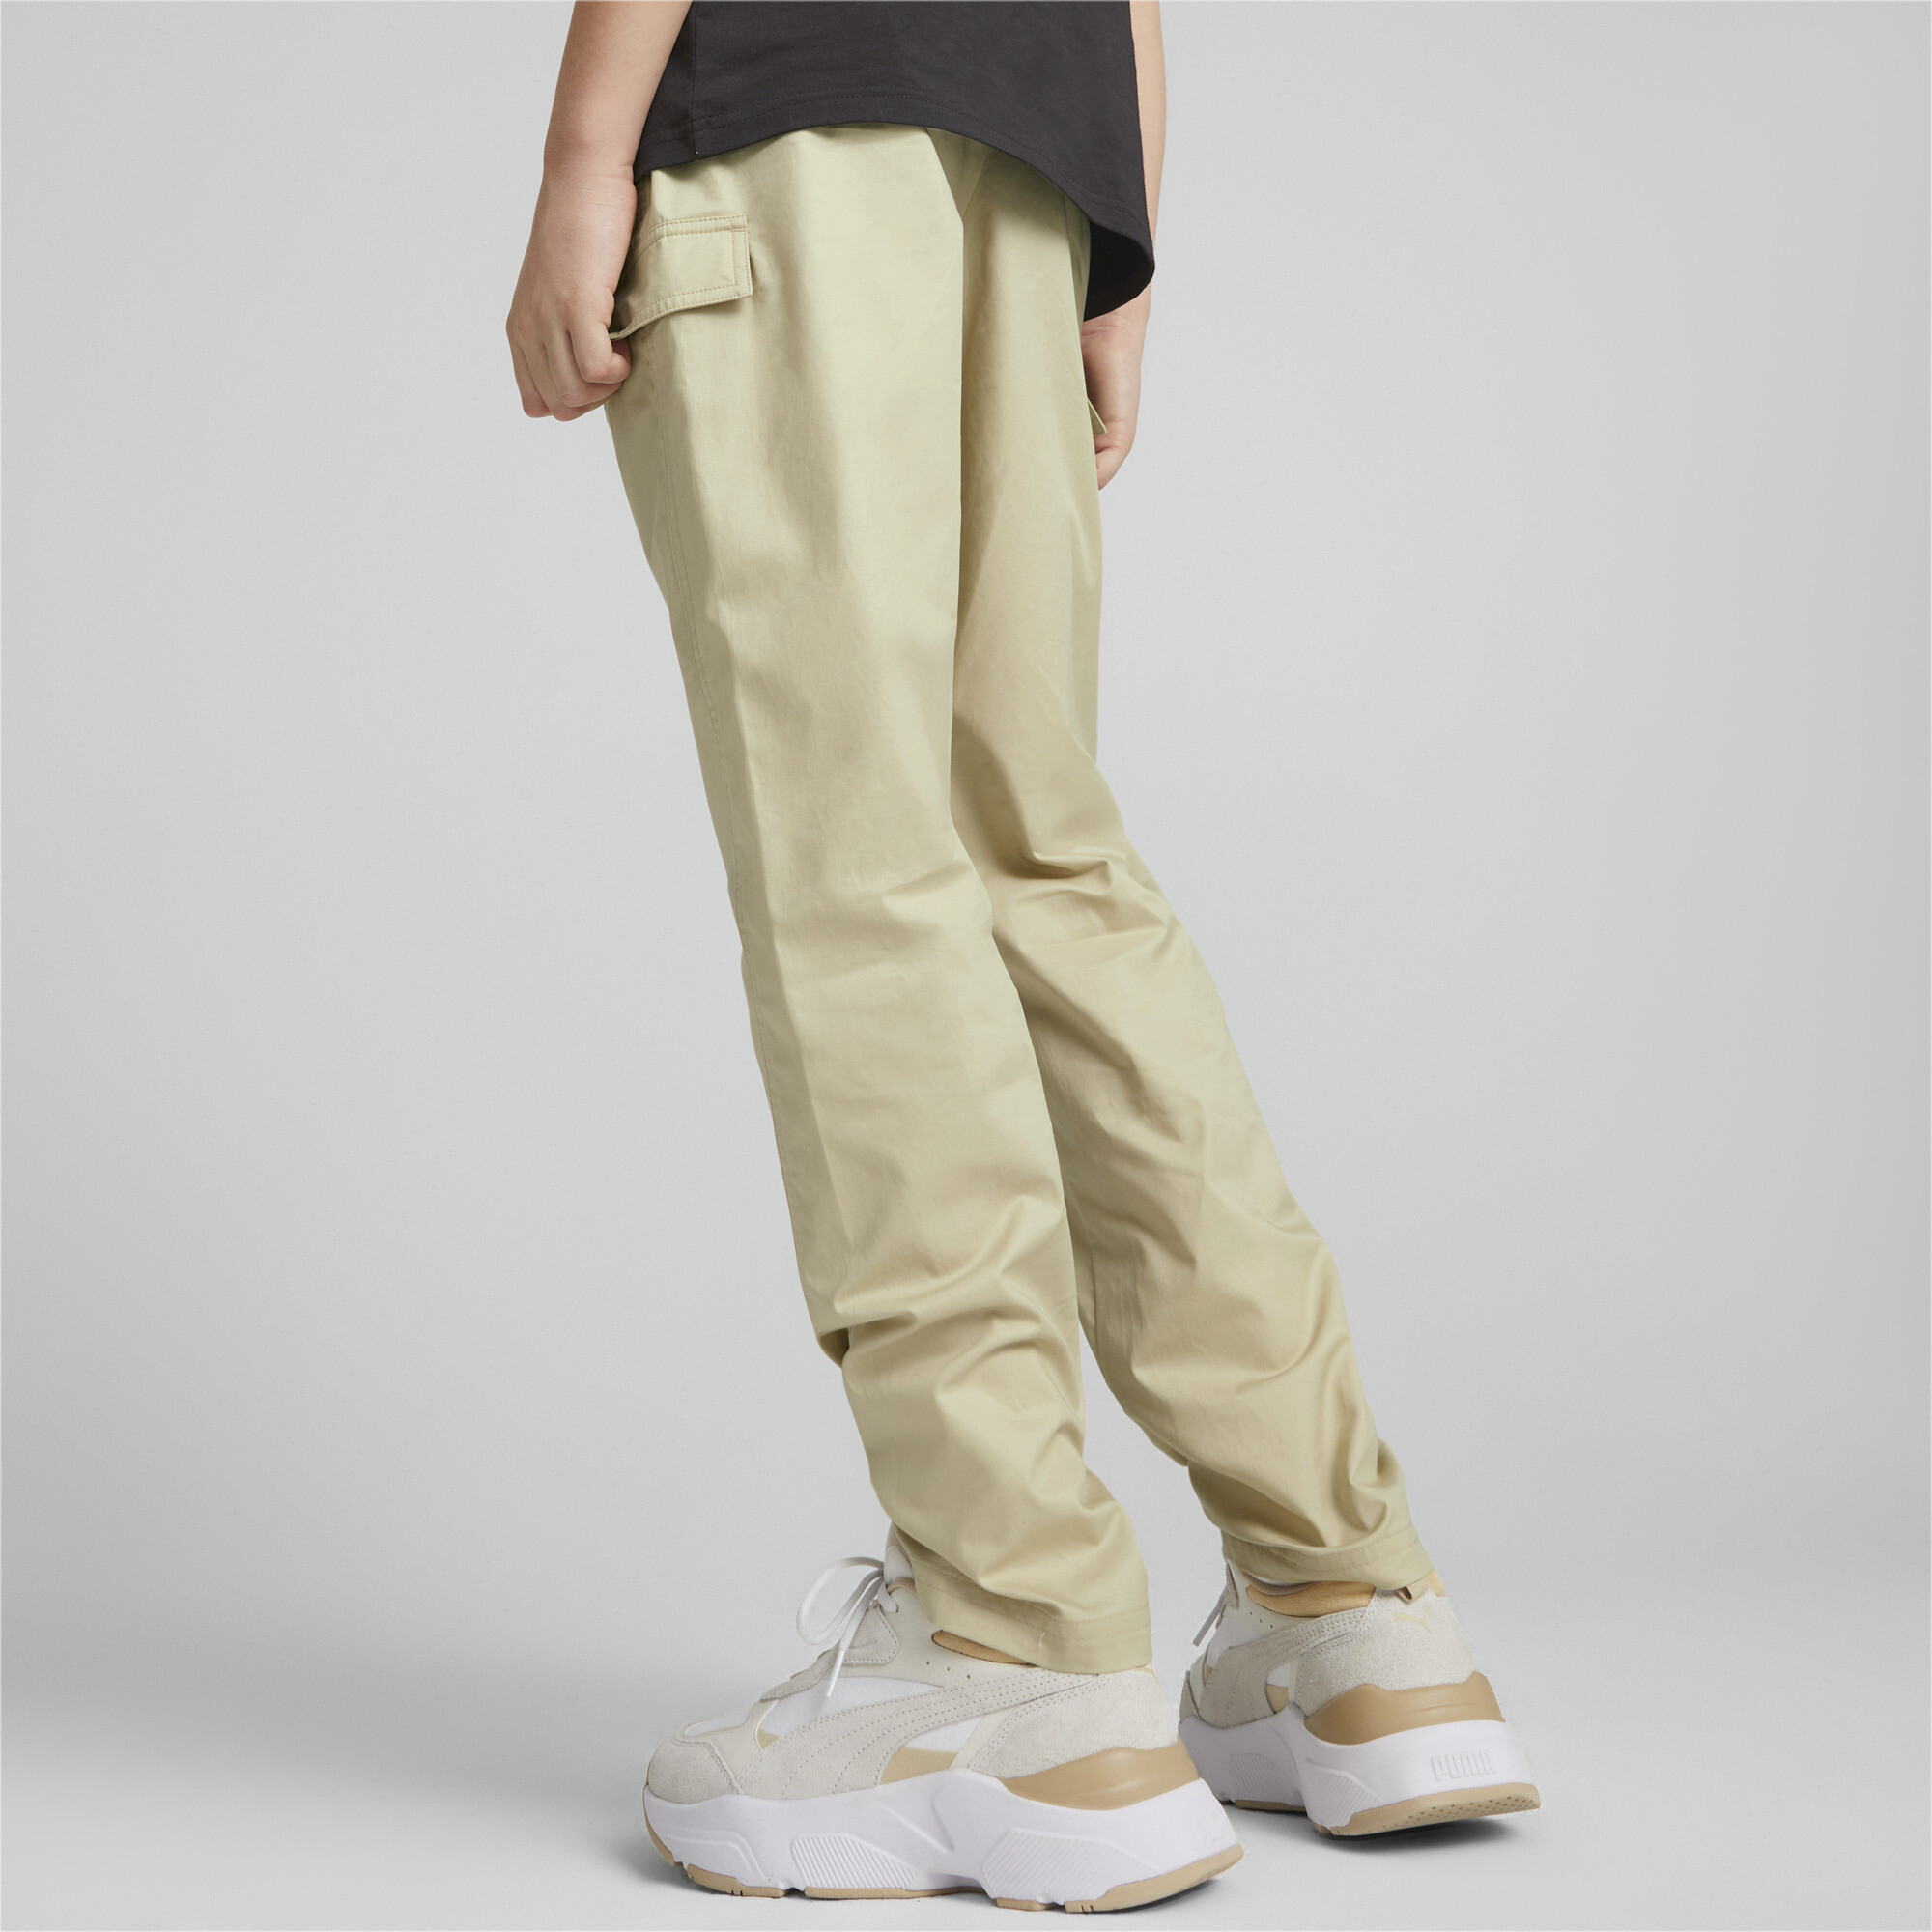 Puma Classics Woven Sweatpants Youth, Beige, Size 11-12Y, Clothing